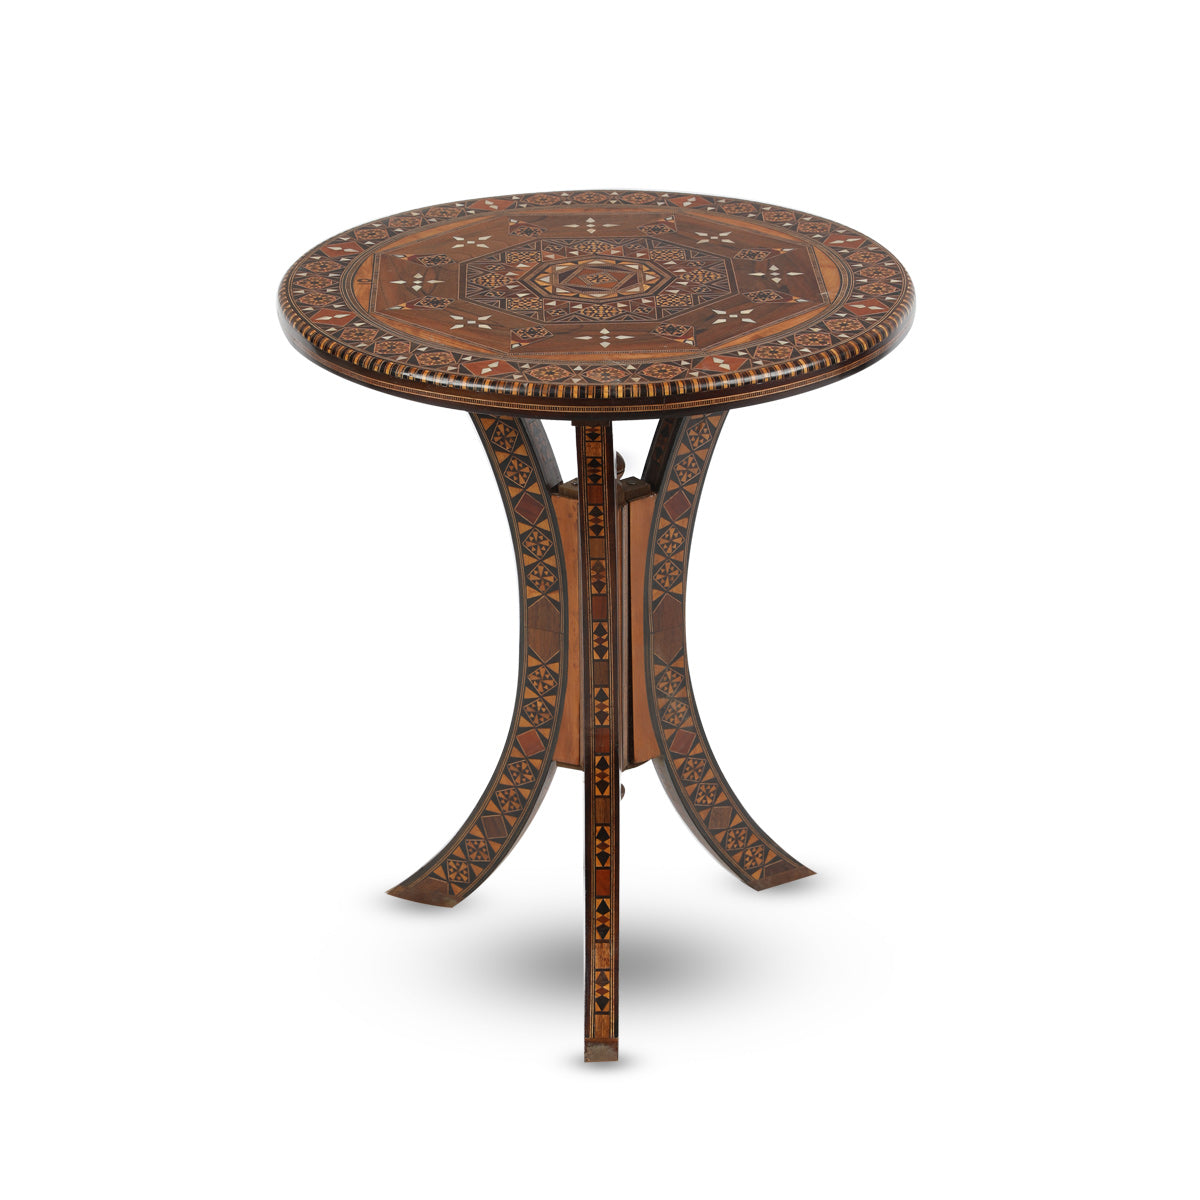 Front Close View of Syrian Style Round Mosaic Patterned Inlaid Wooden Coffee Table